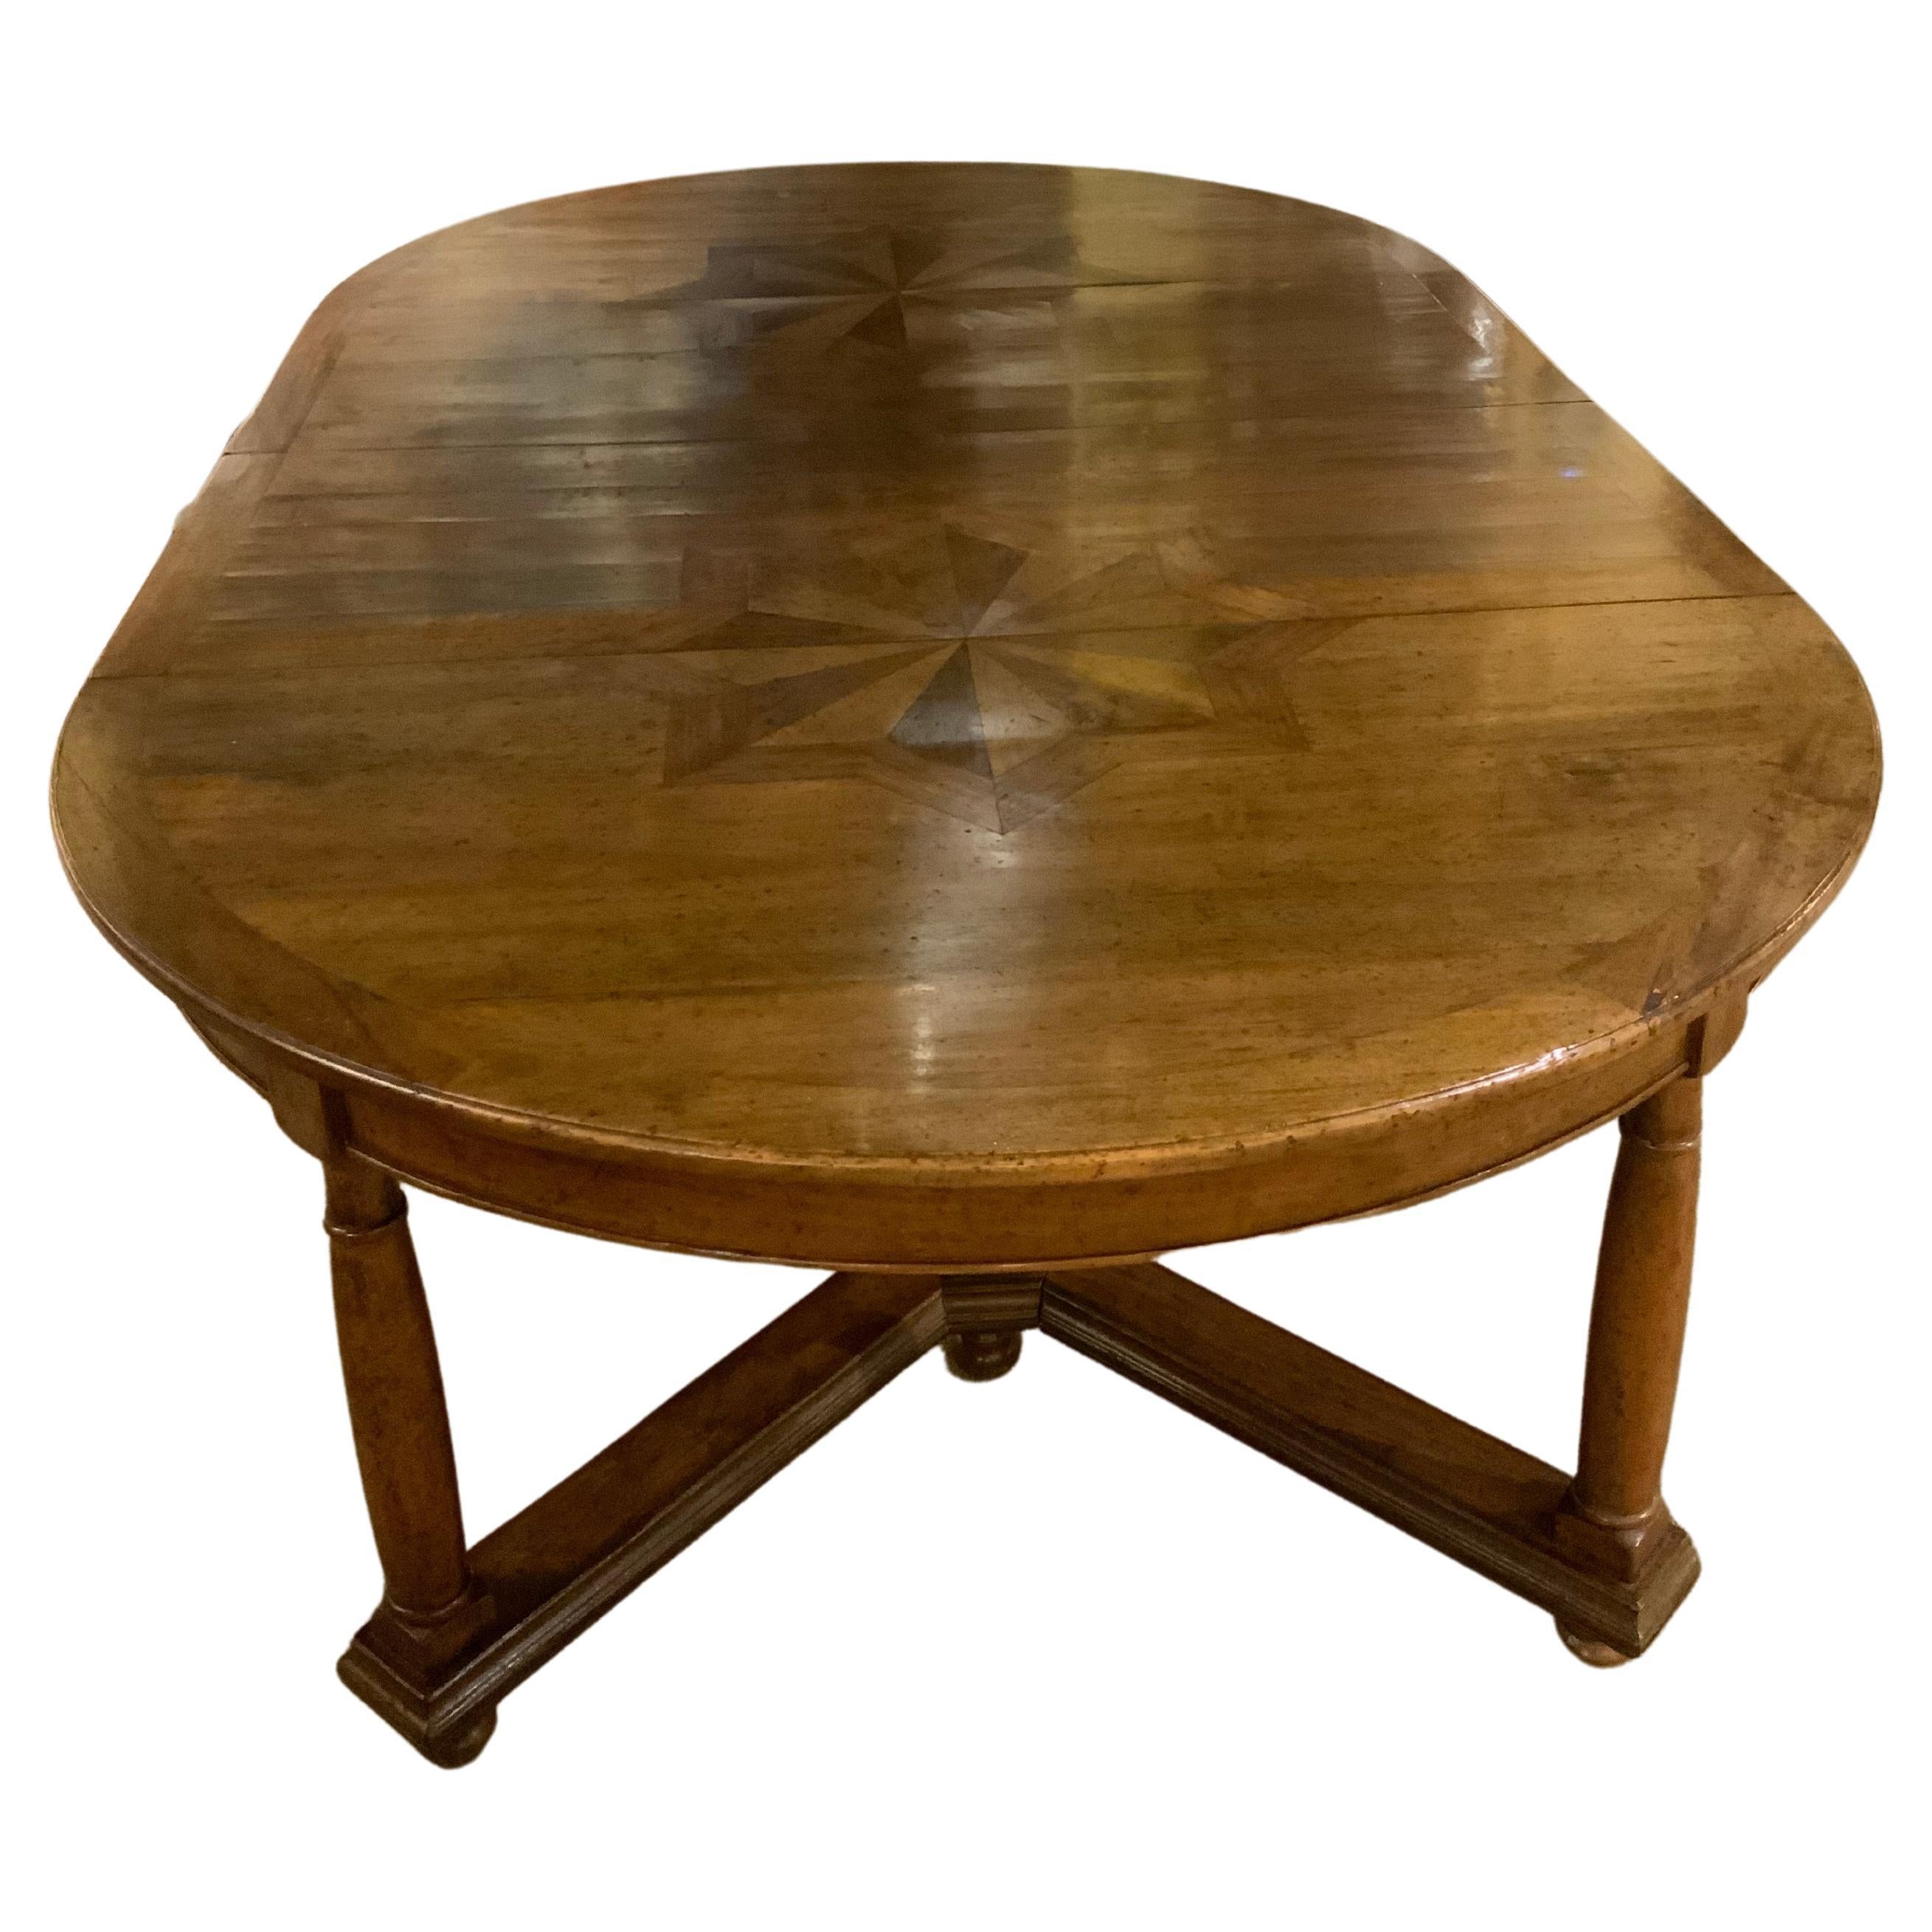 Handsome Oval Shaped Dining Table with Star Inlay in the Top, V-Shaped Stretcher